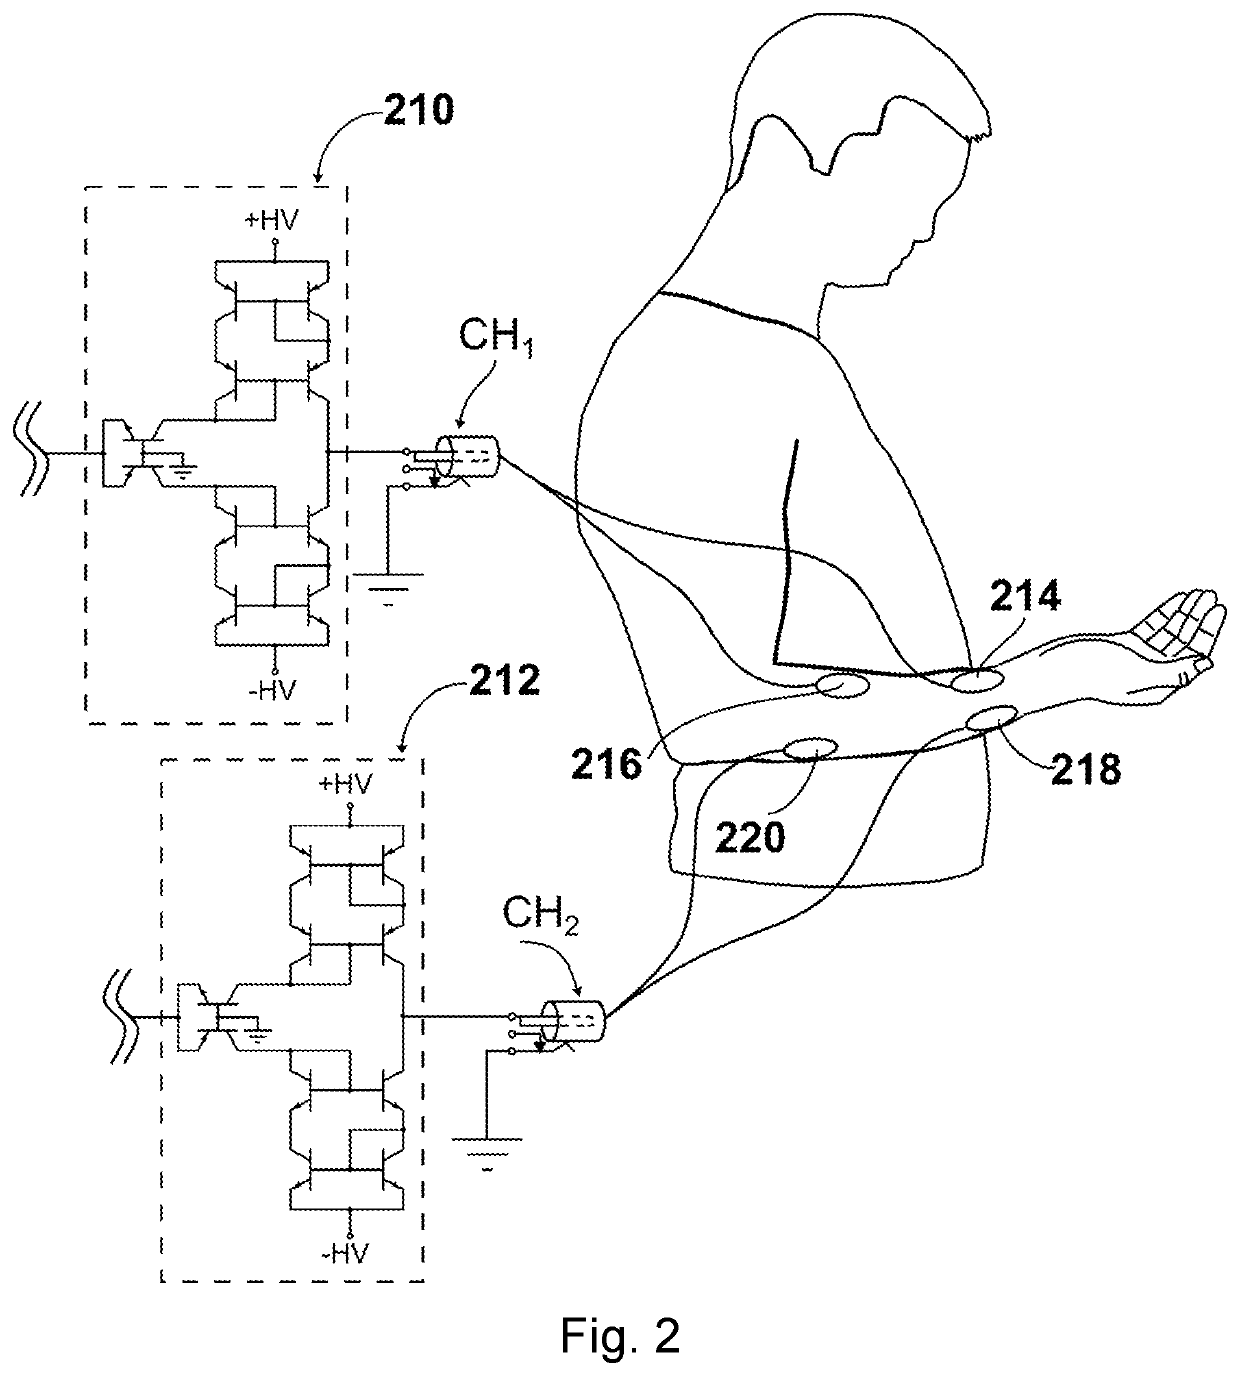 Neuromuscular Stimulation Using Multistage Current Driver Circuit